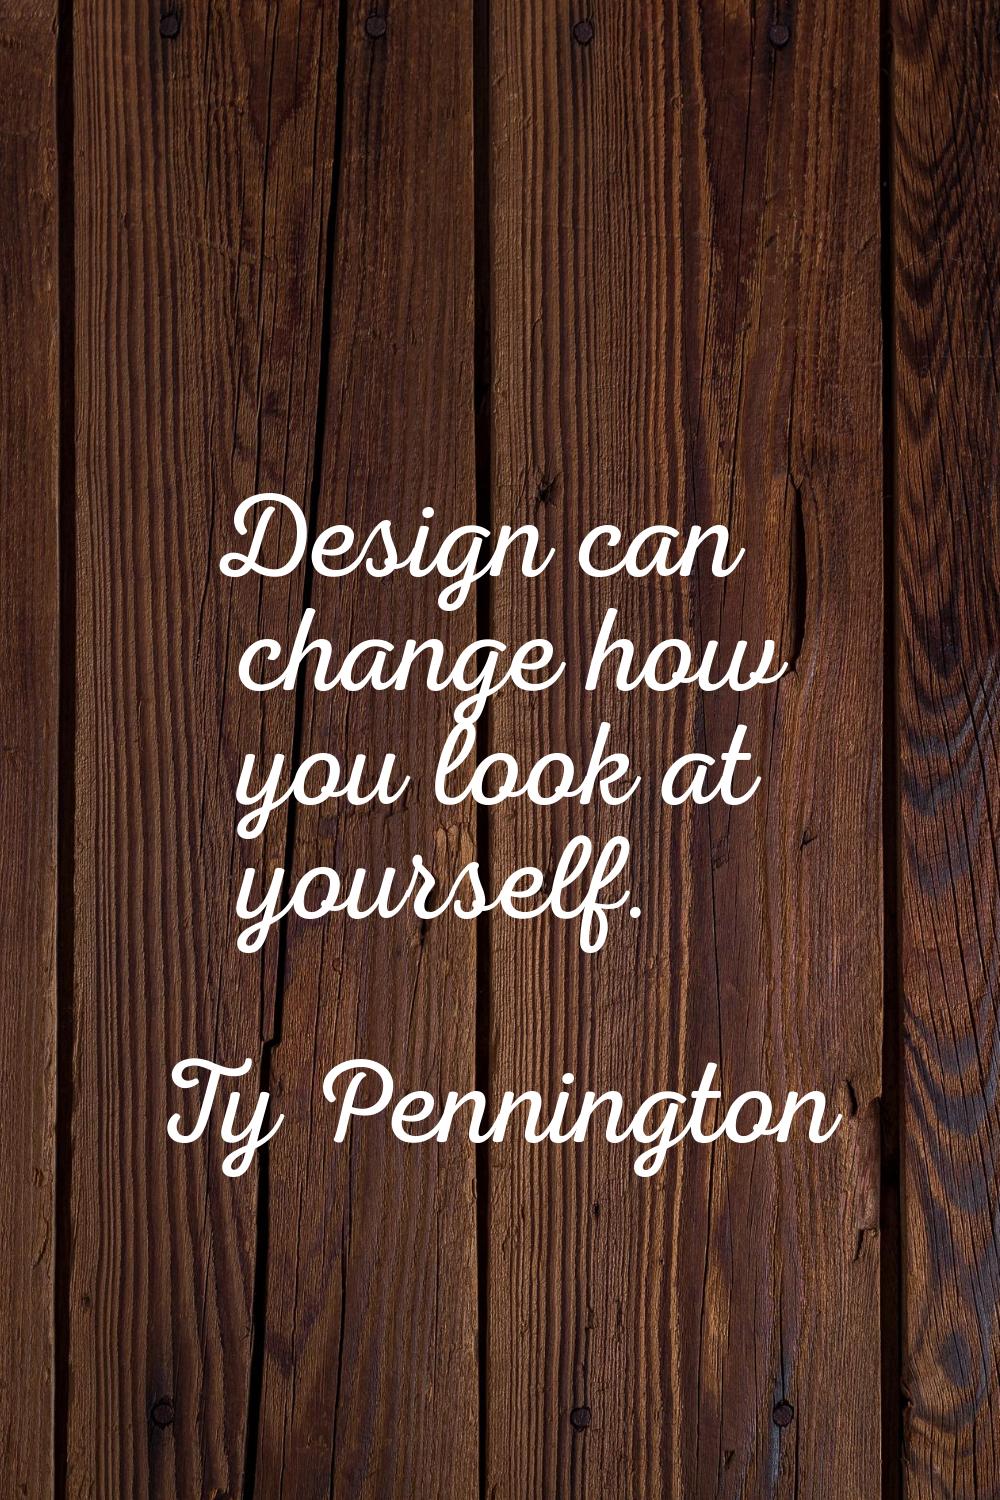 Design can change how you look at yourself.